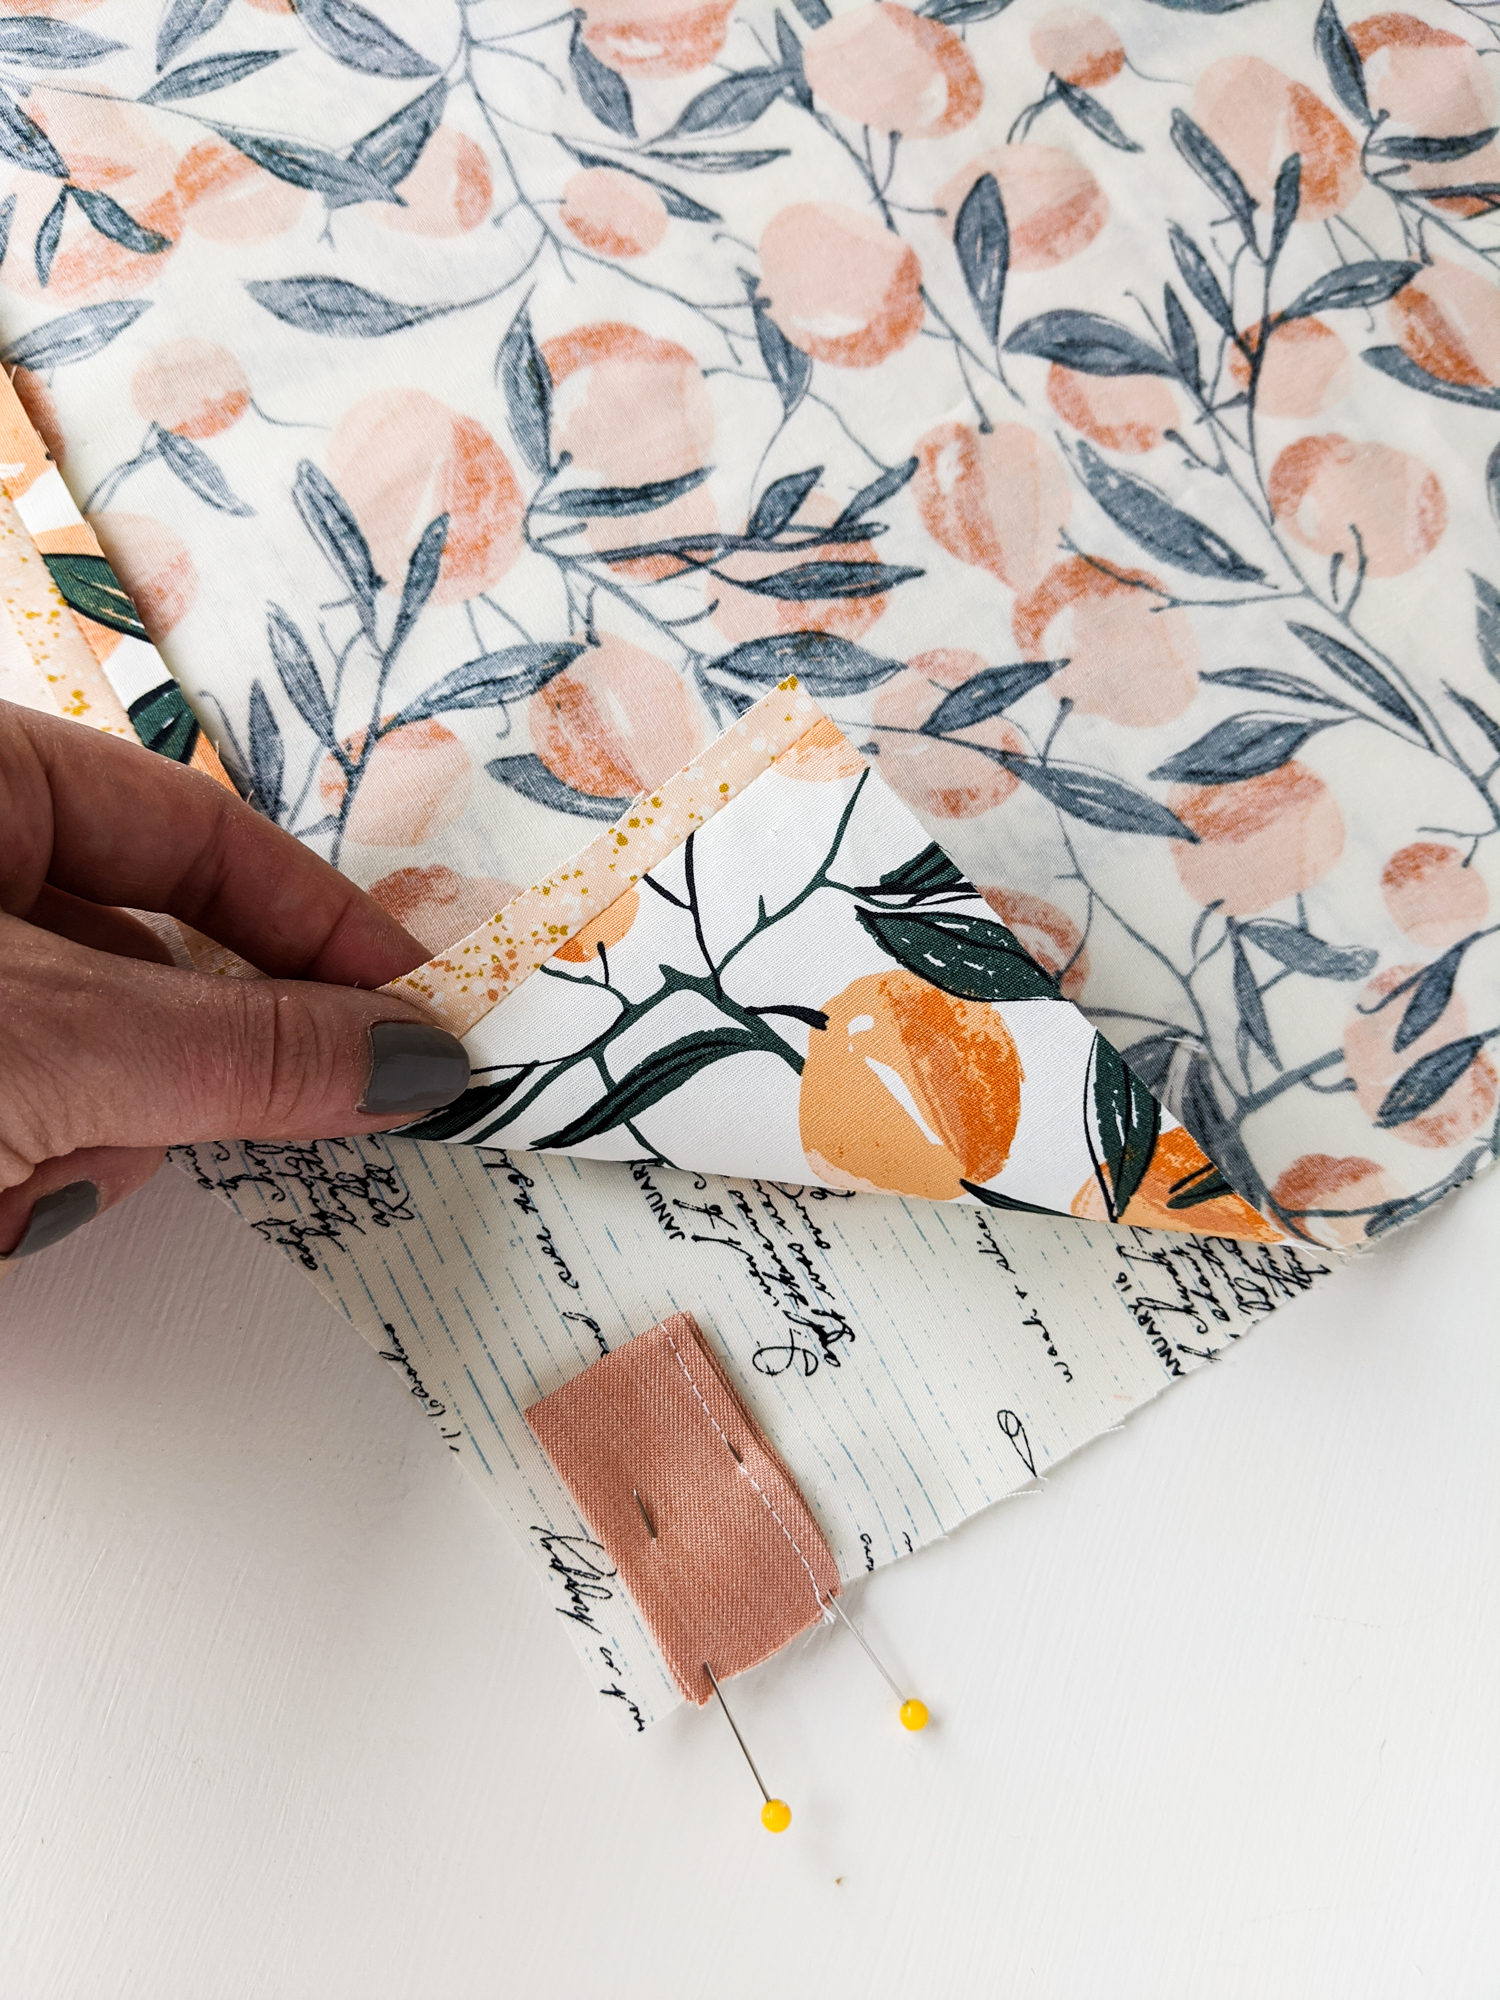 This modern patchwork apron tutorial is a fun, quick project for any sewing skill level!